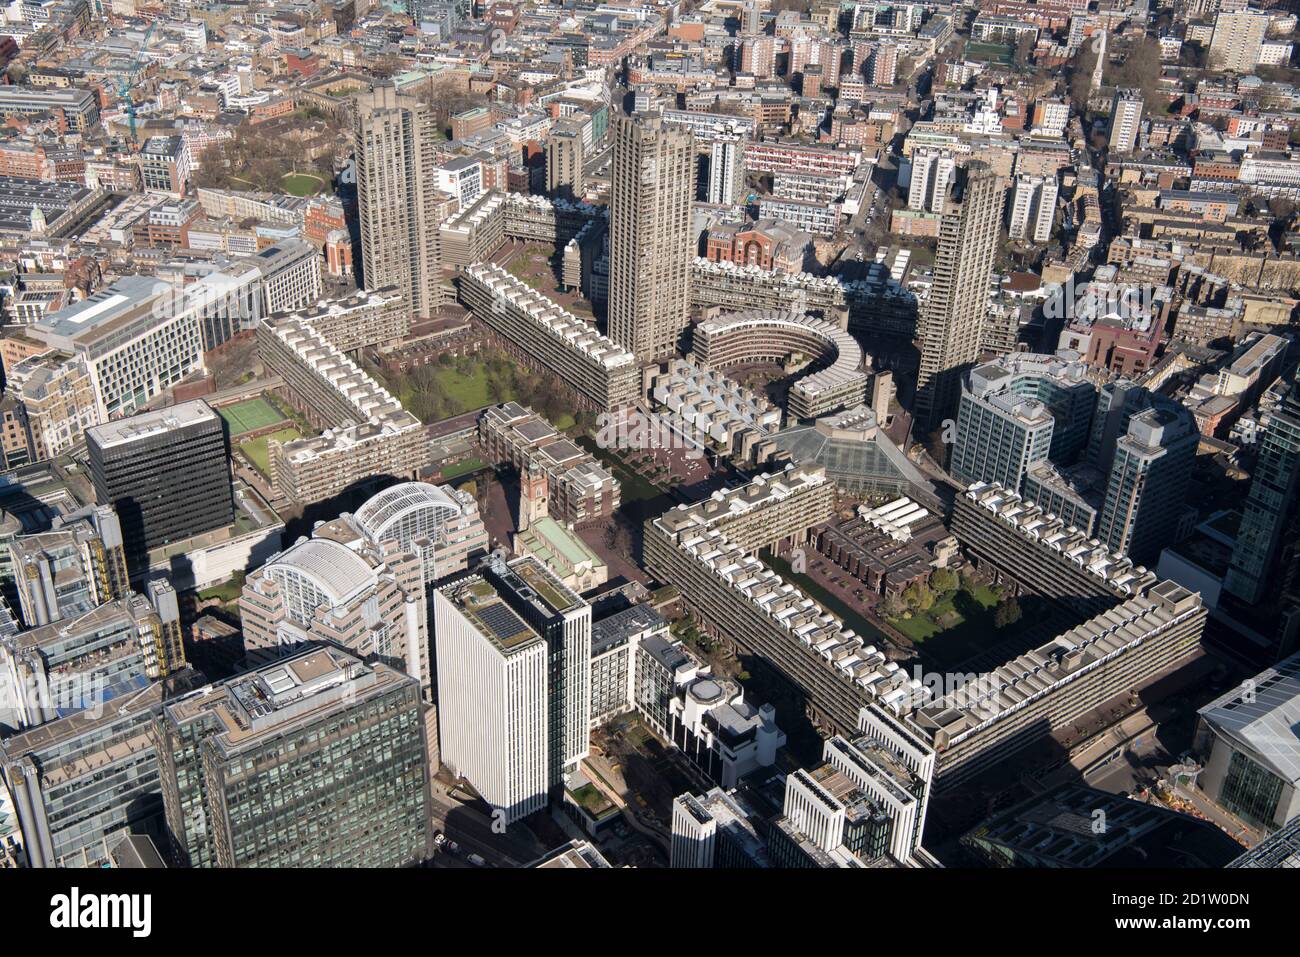 The Barbican Arts and Conference Centre and Housing Estate, London, 2018, Großbritannien. Luftaufnahme. Stockfoto